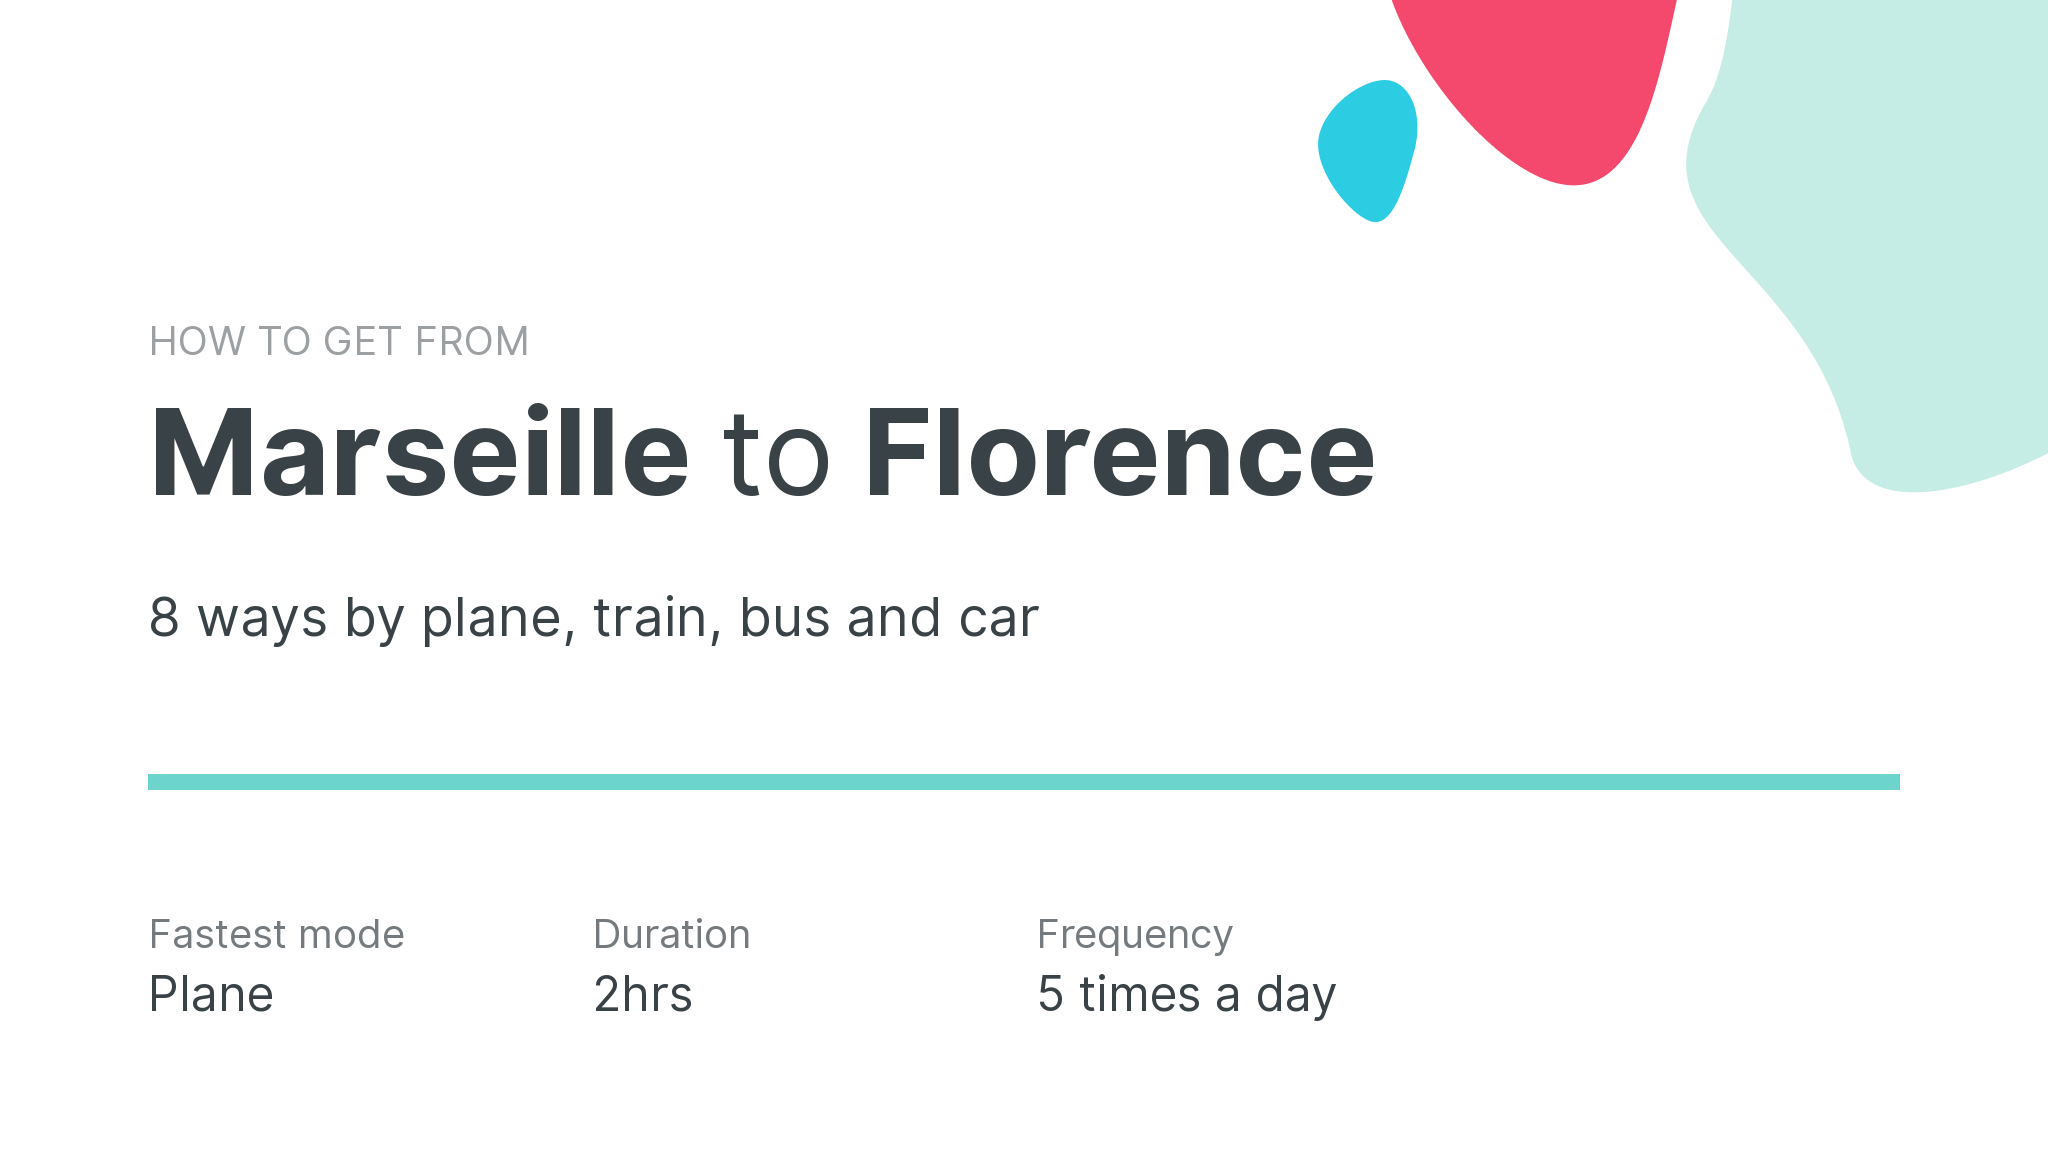 How do I get from Marseille to Florence